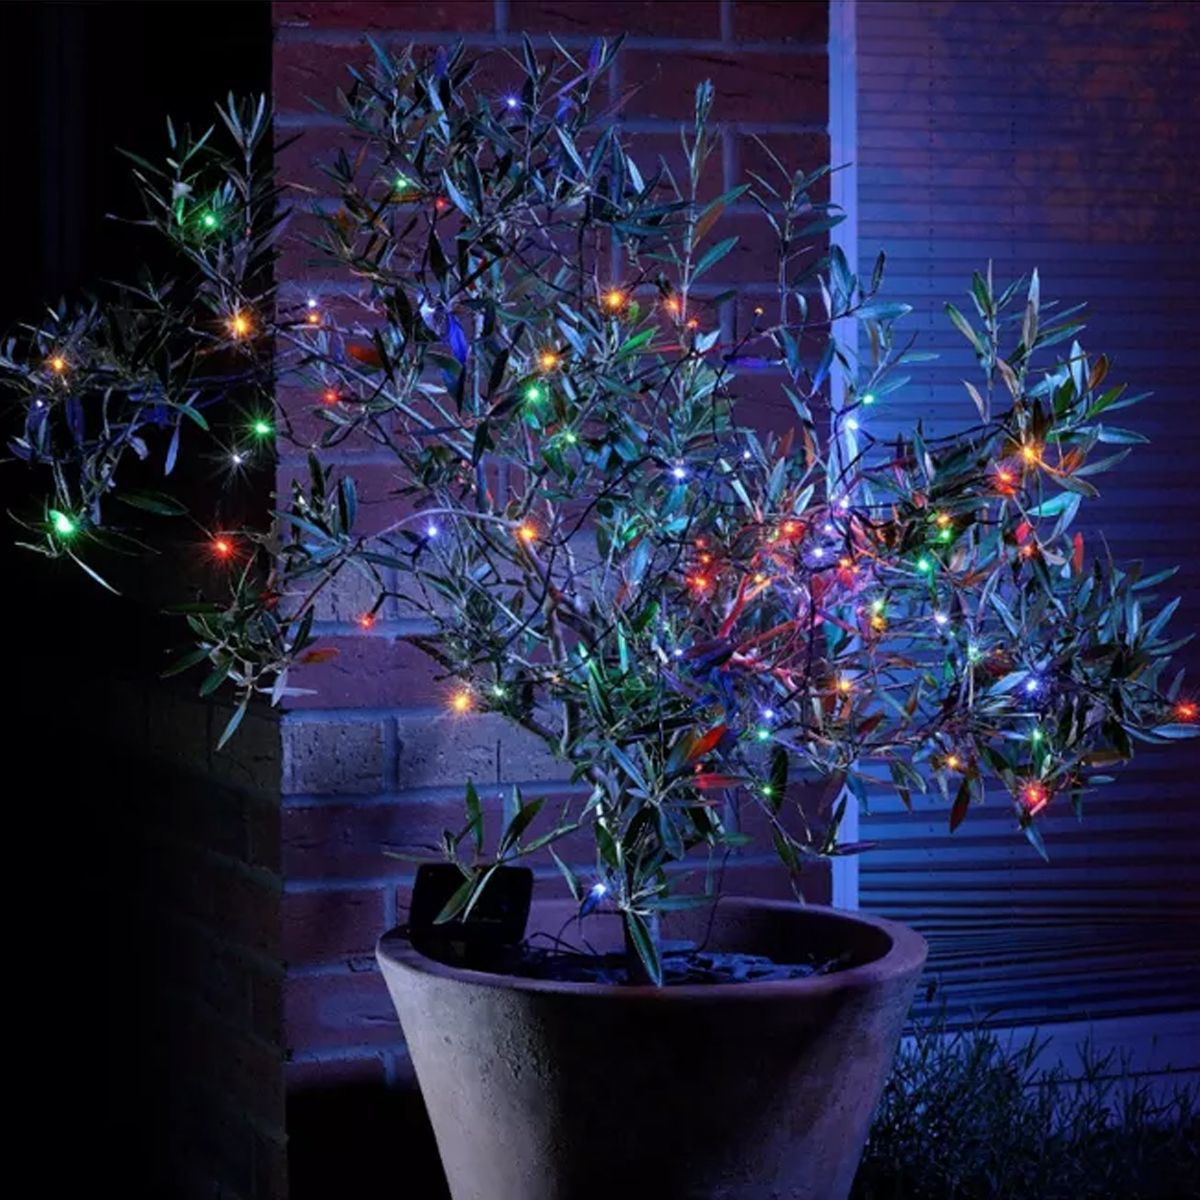 6M-Outdoor-LED-Solar-Fairy-String-Light-8-Modes-Waterproof-Garden-Yard-Holiday-Home-Decor-1723784